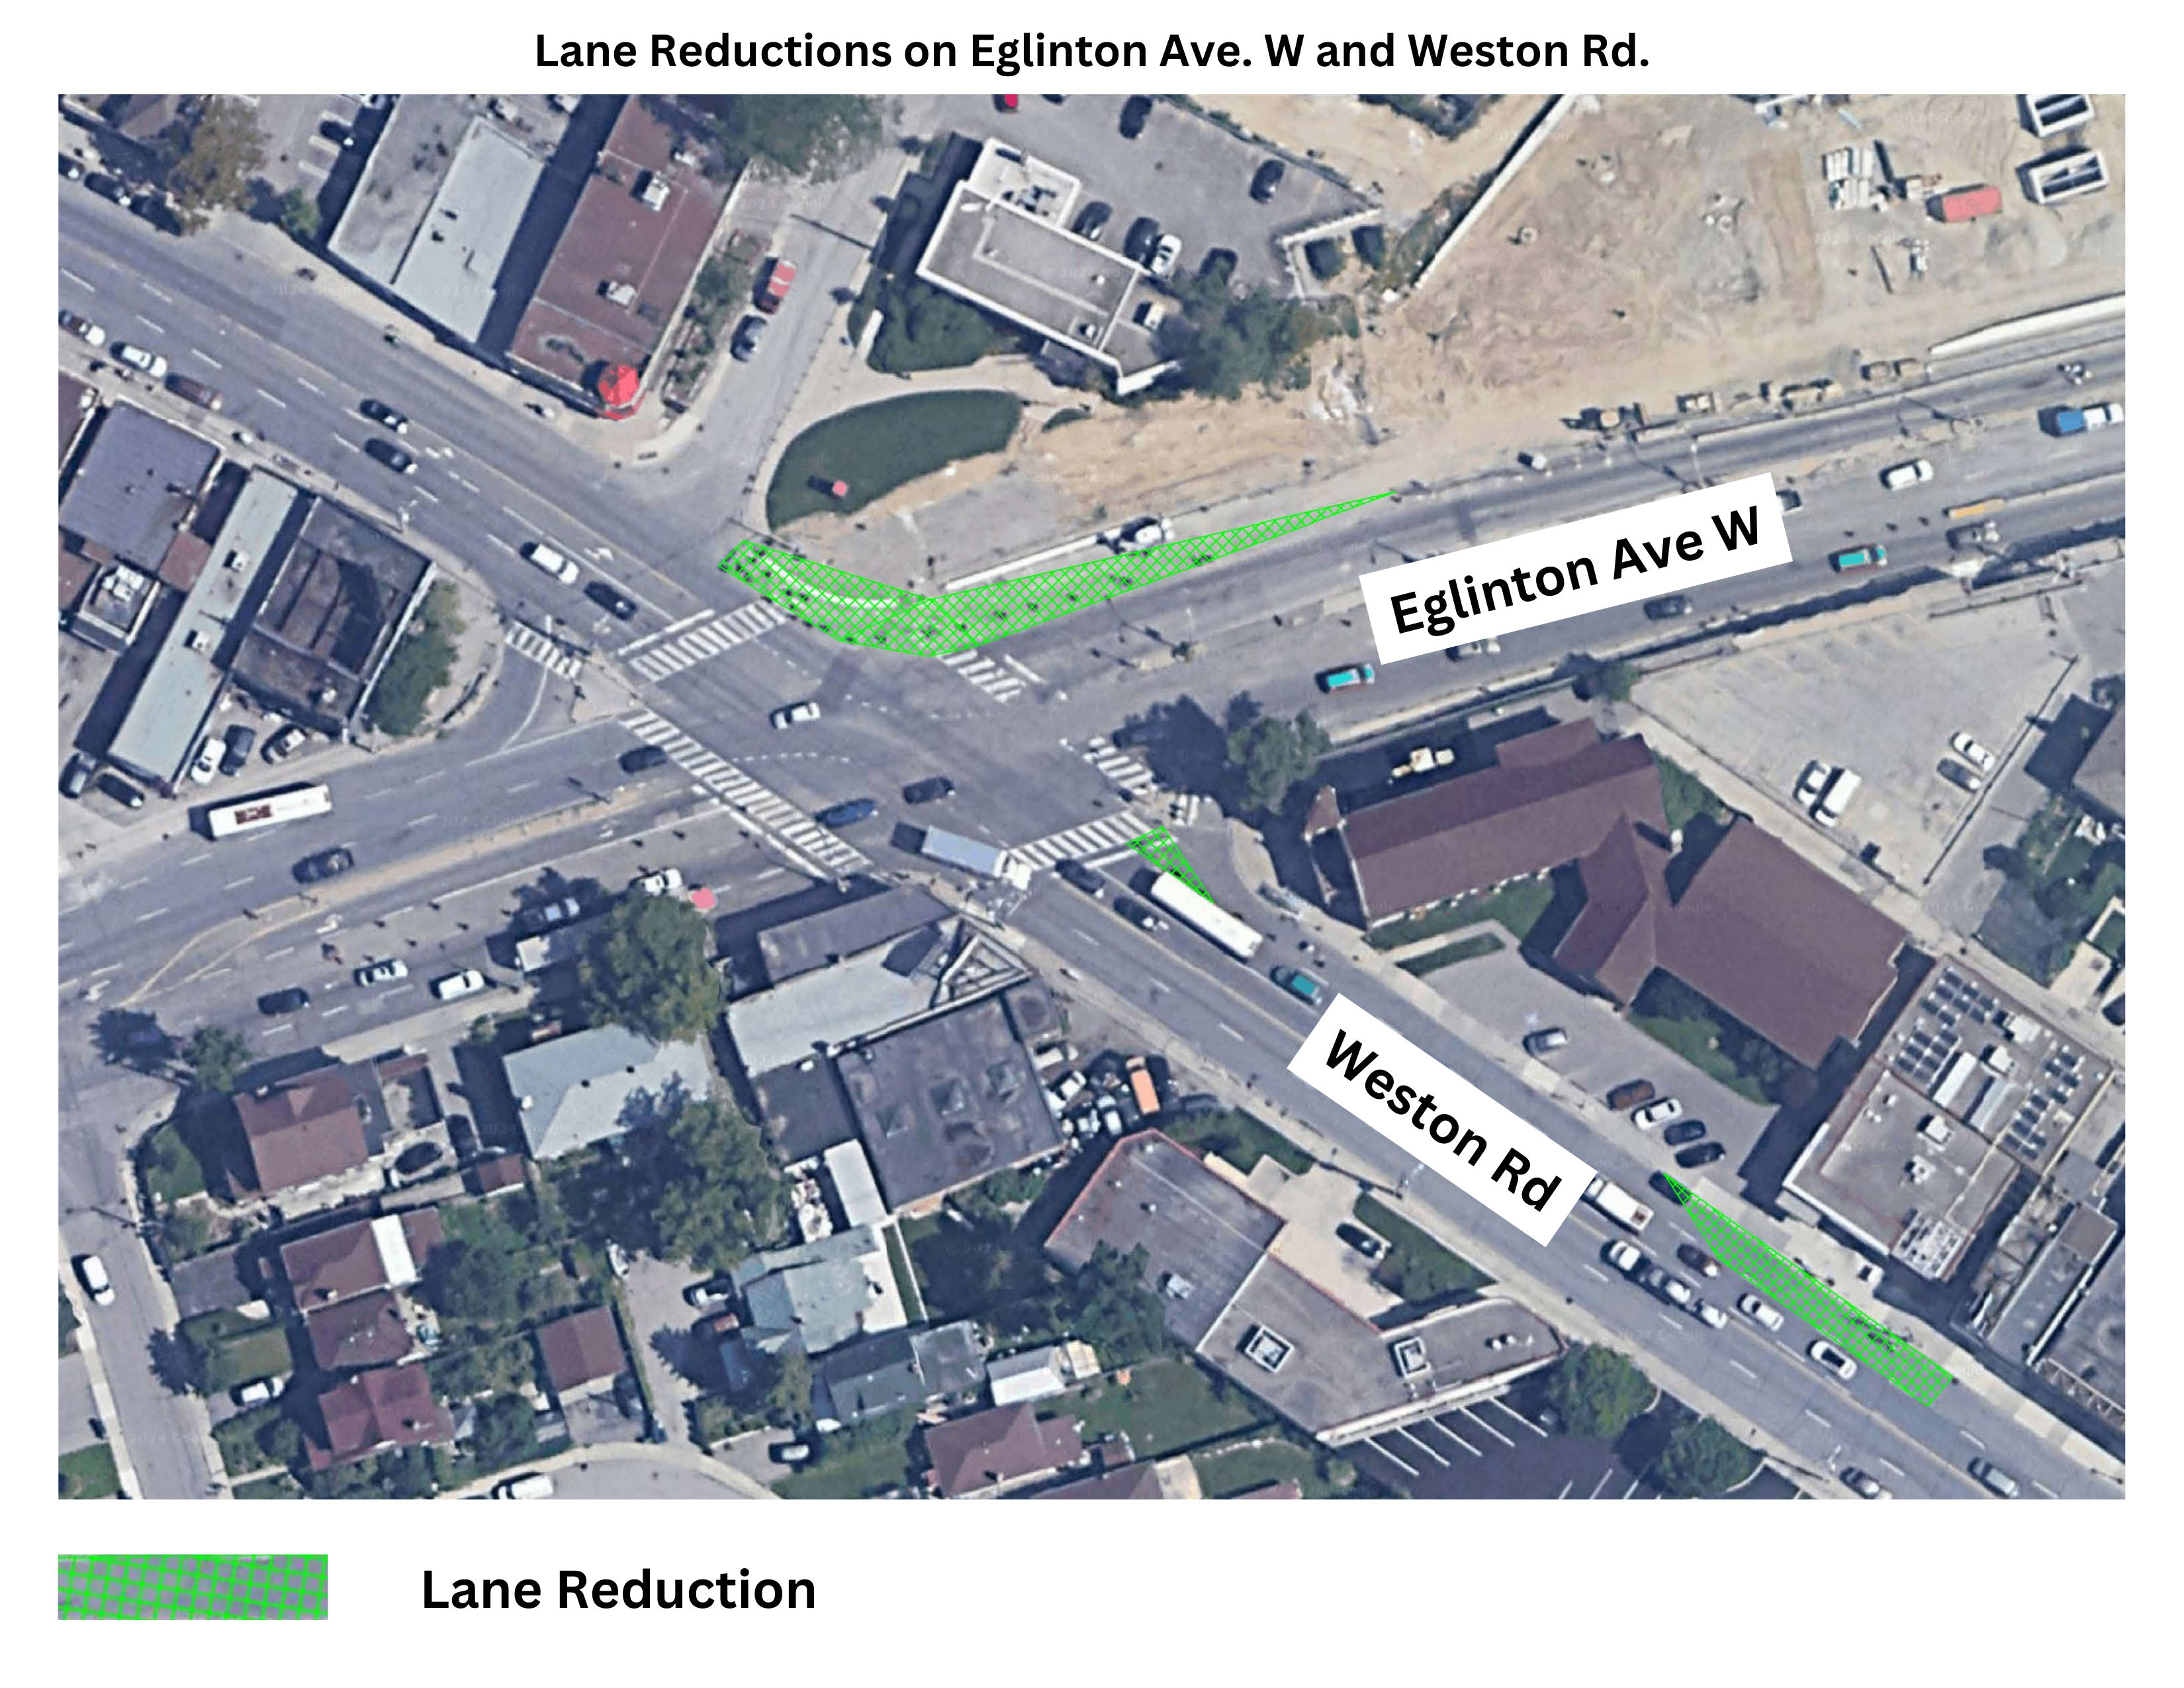 Lane Reductions on Eglinton Ave E and Weston Rd